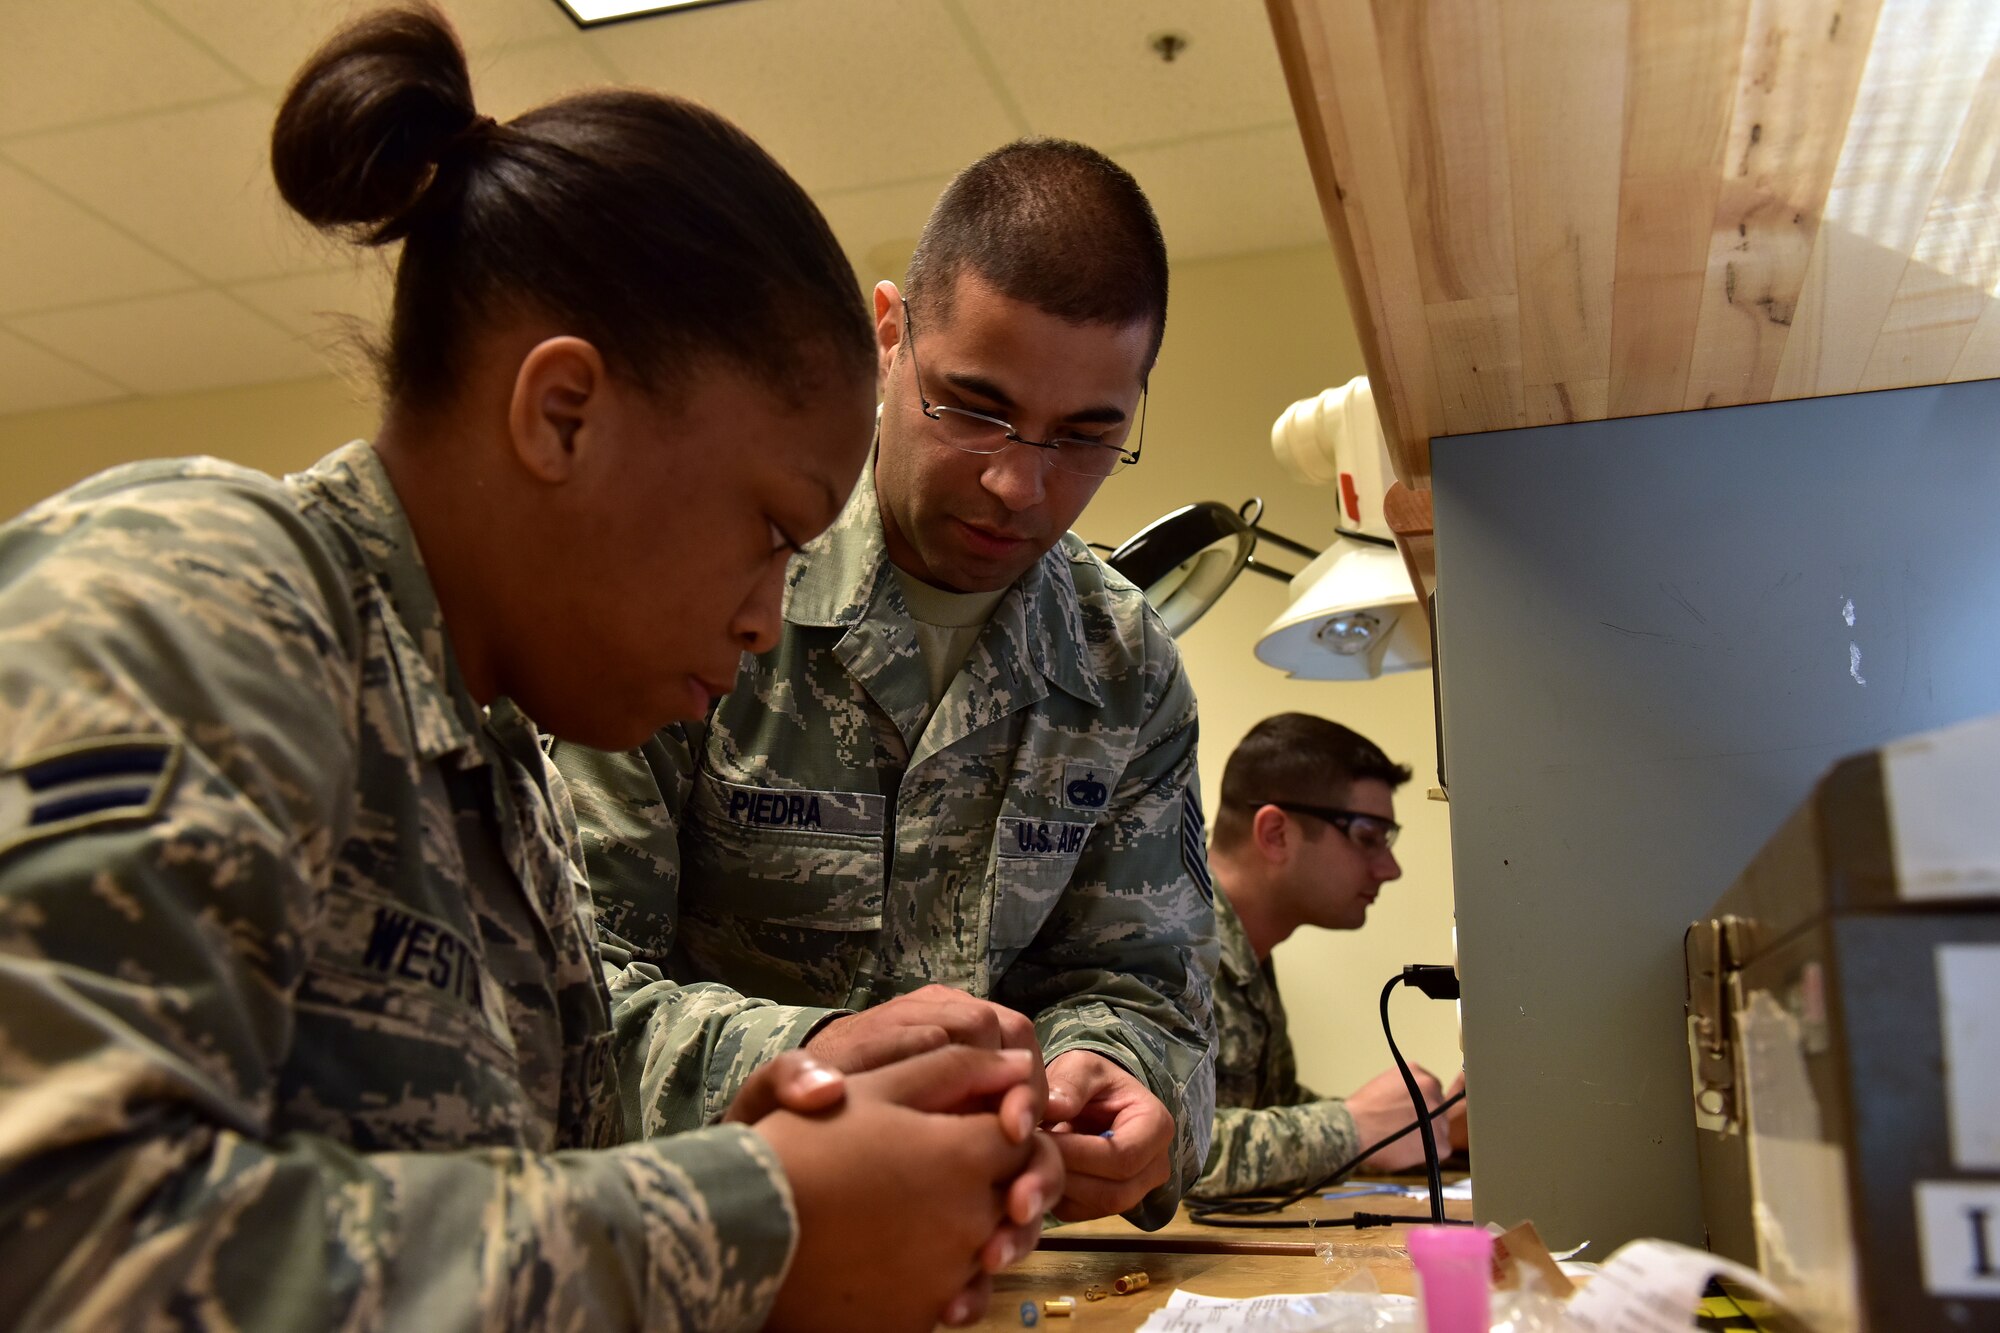 U.S. Air Force Tech. Sgt. Jose Piedra, center, 373rd Training Squadron Detachment 4 production supervisor and instructor, demonstrates splicing and building a 1553B databus cable to Airman 1st Class Shania Westin, left, 373rd TRS student, for the C-130J Feb. 23, 2017 at the Center of Excellence on Little Rock Air Force Base, Ark.  The Airman must understand how the cable functions as it transfers information throughout the aircraft and be able to build new ones effectively. (U.S. Air Force photo by Staff Sgt. Jeremy McGuffin)